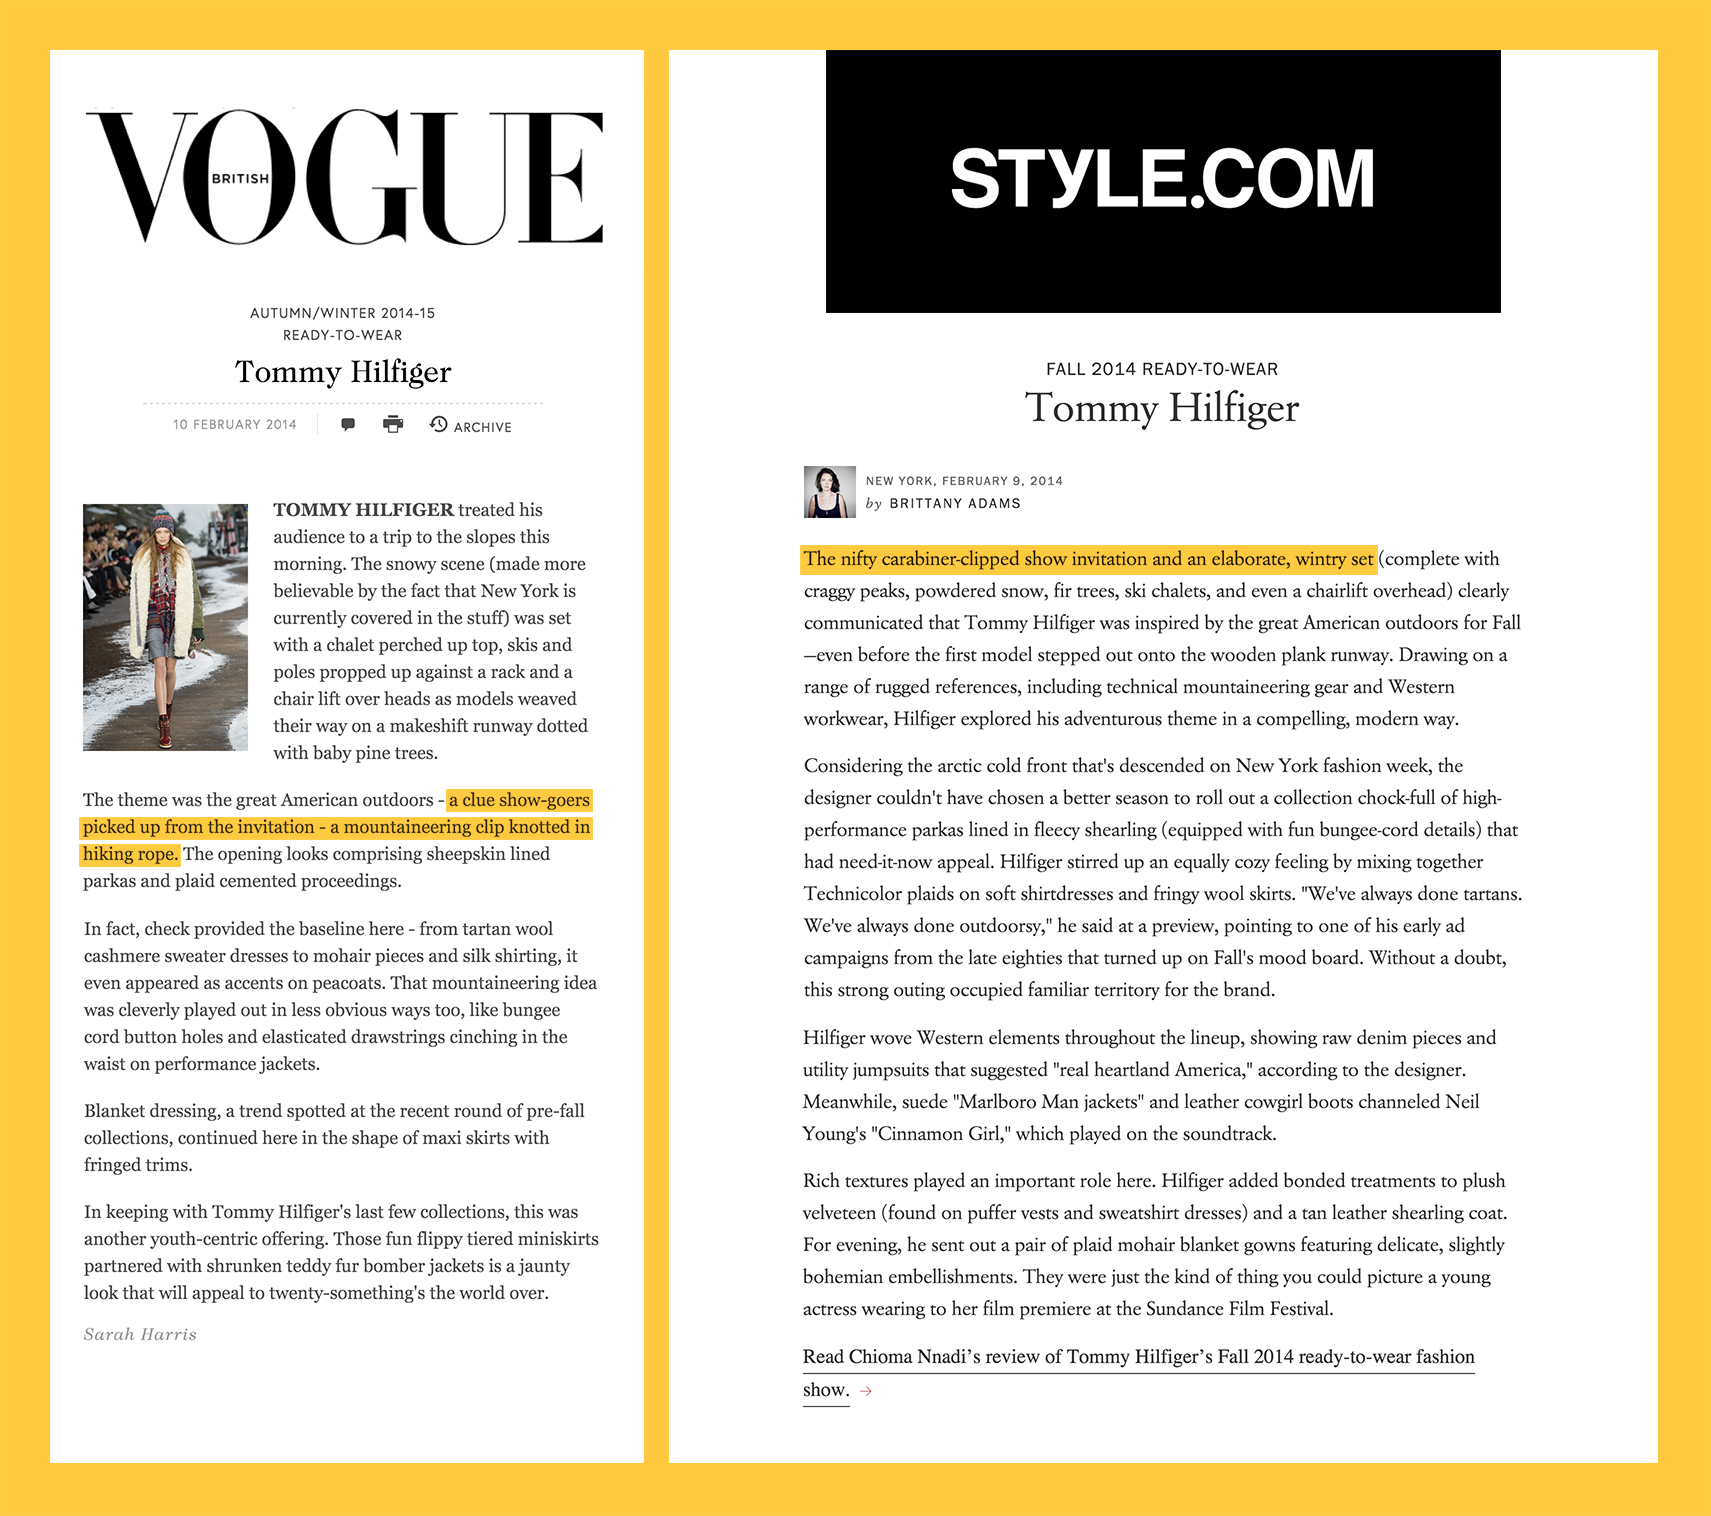  Ain't no valley low with  British Vogue  and  Style.com . 